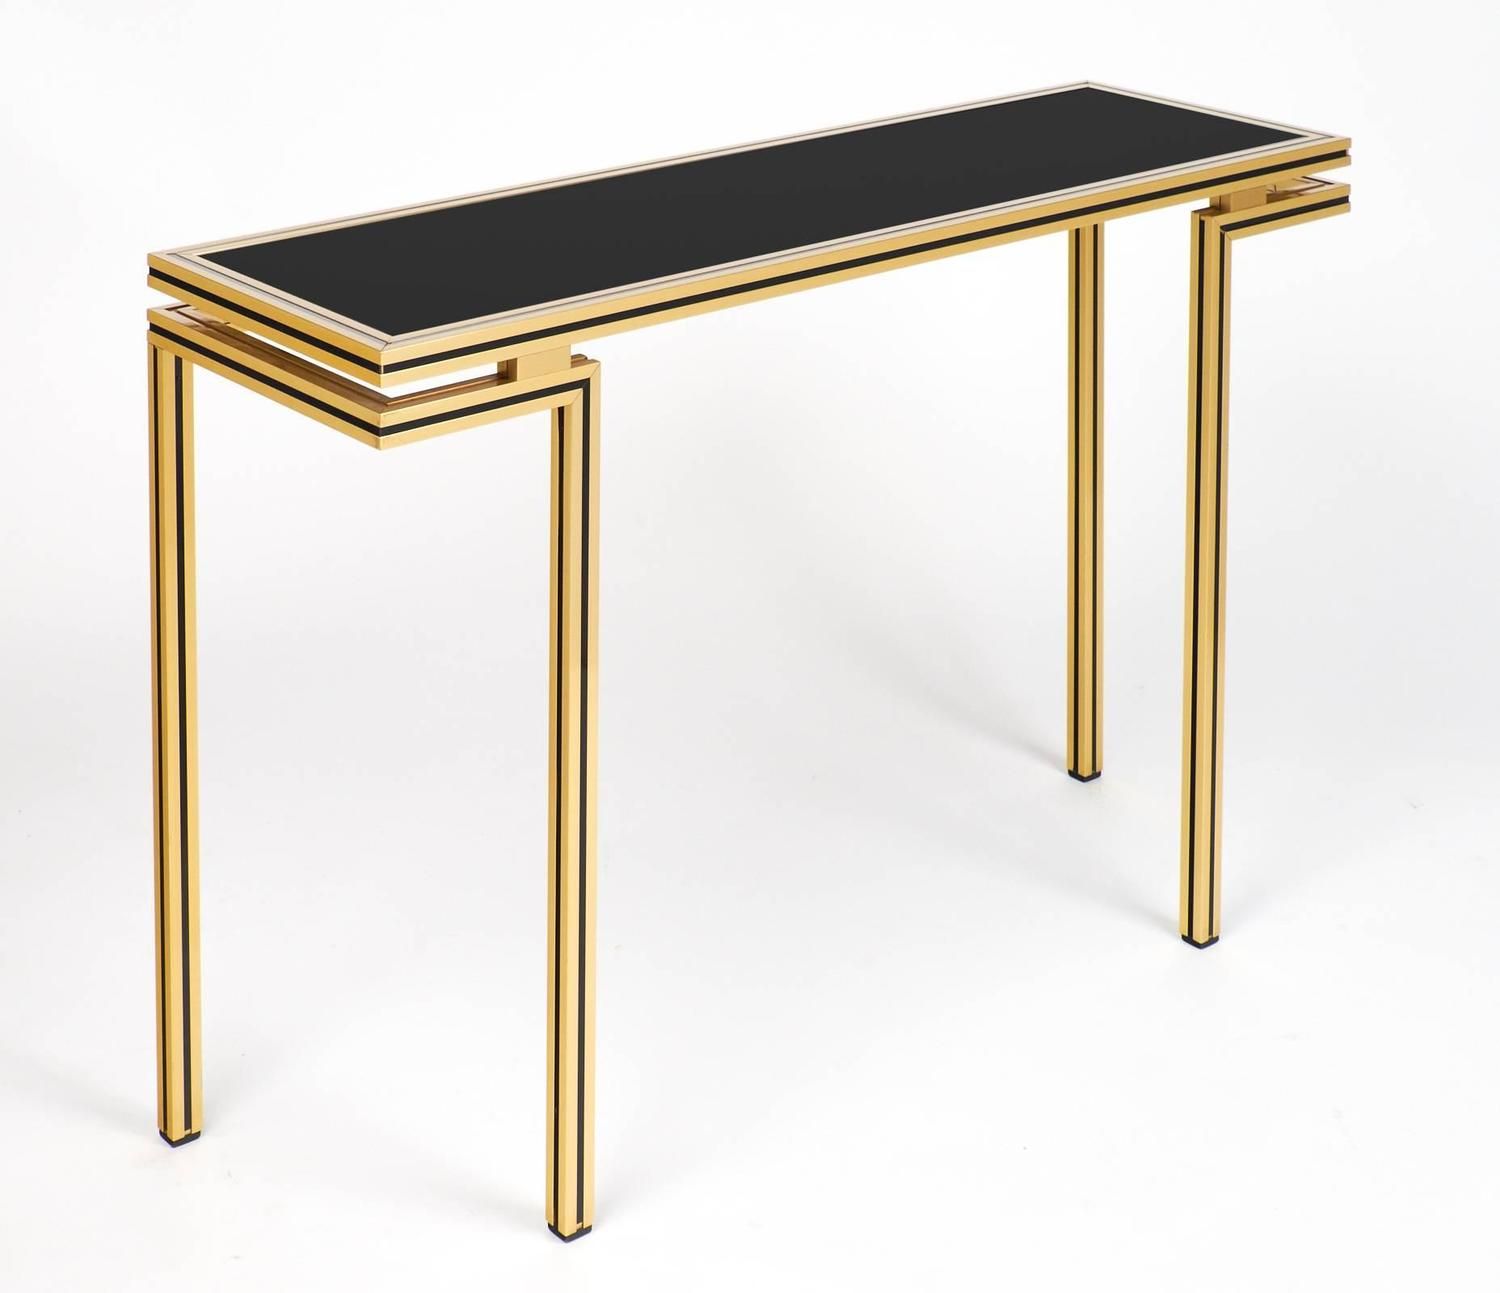 Vintage Black Glass Top Brass Console Tablepierre Vandel At 1stdibs With Antique Brass Aluminum Round Console Tables (View 14 of 20)